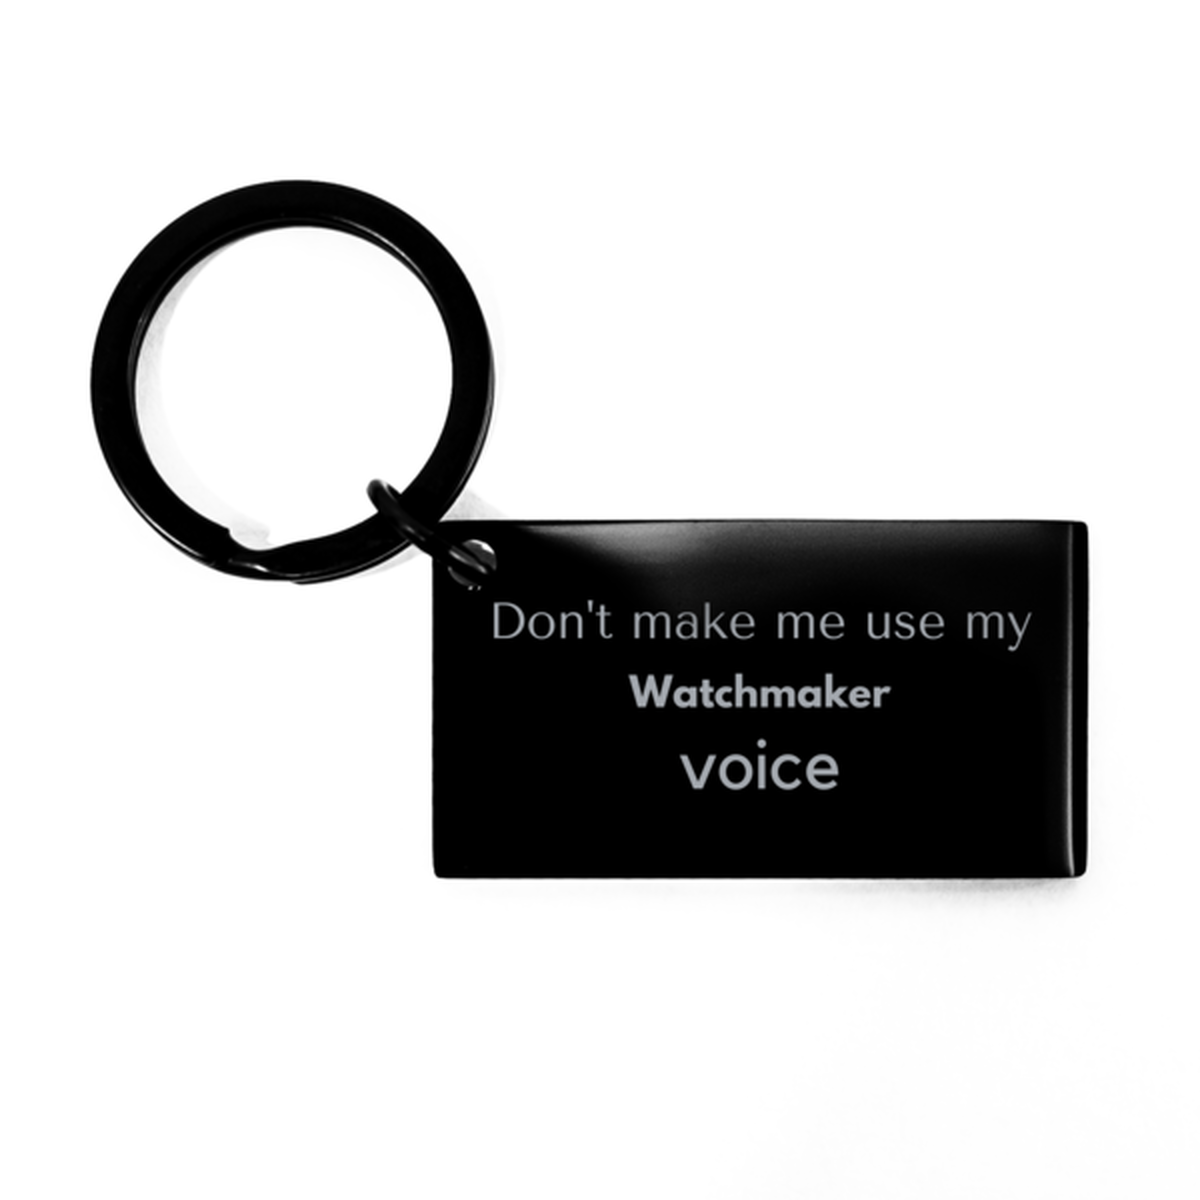 Don't make me use my Watchmaker voice, Sarcasm Watchmaker Gifts, Christmas Watchmaker Keychain Birthday Unique Gifts For Watchmaker Coworkers, Men, Women, Colleague, Friends